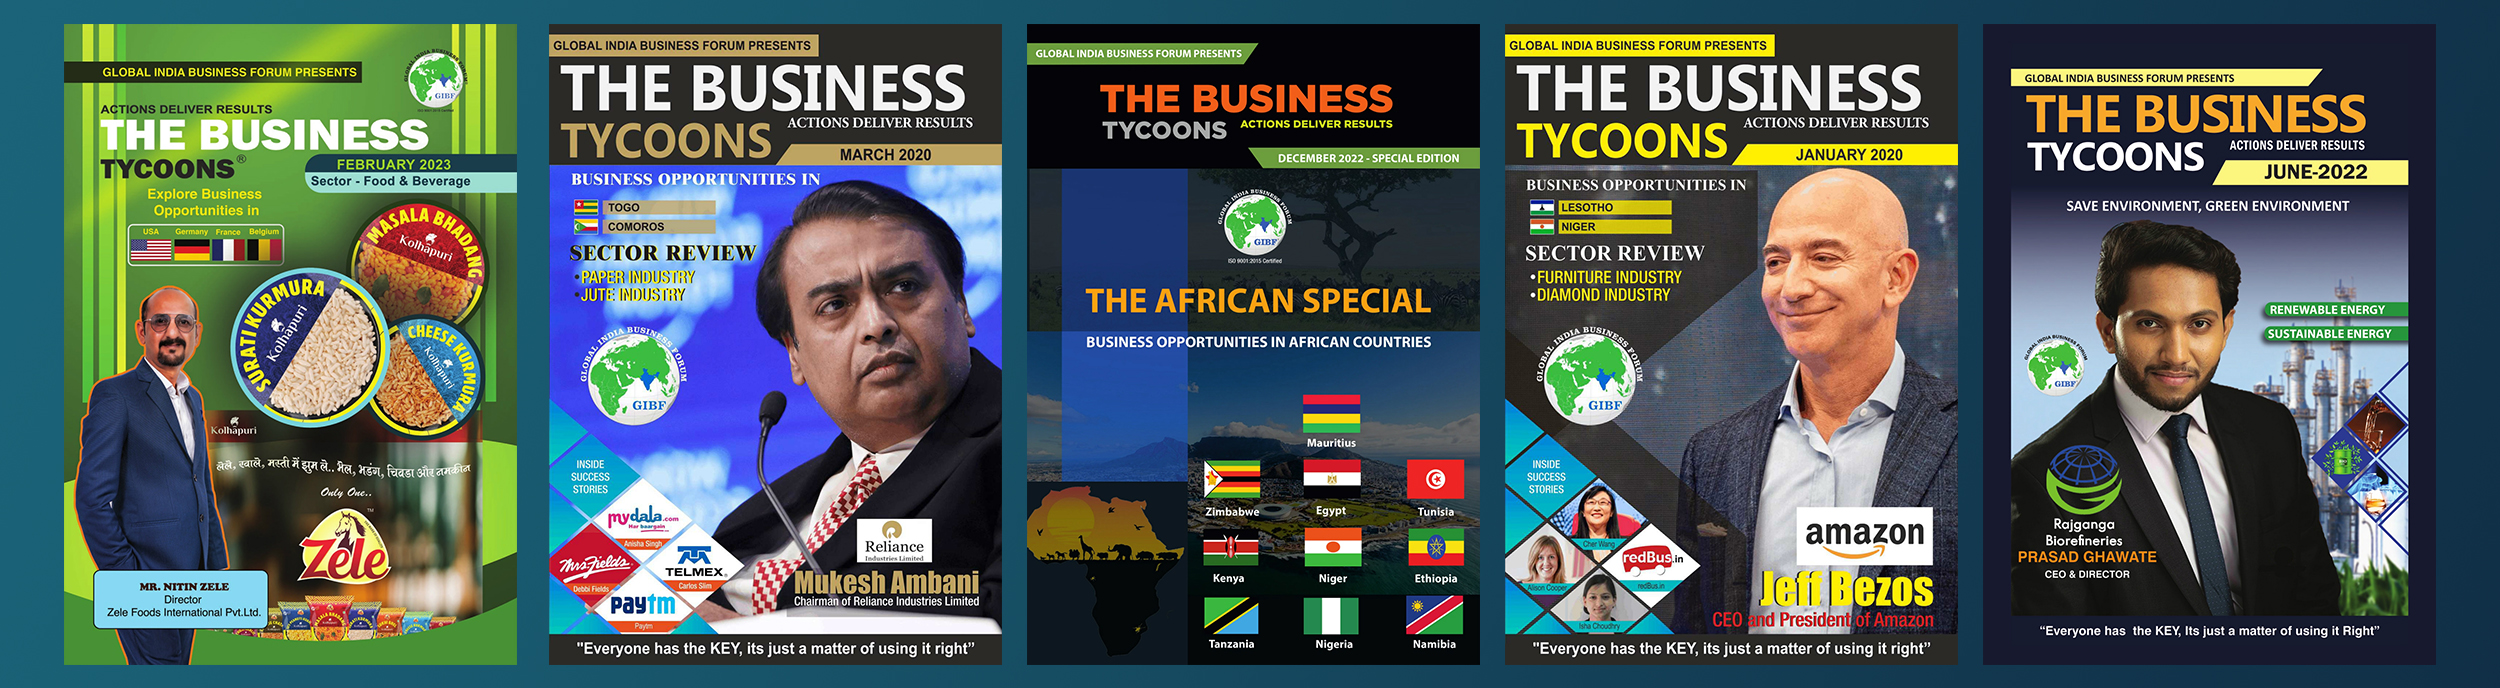 The Business Tycoons magazines slider - 2022